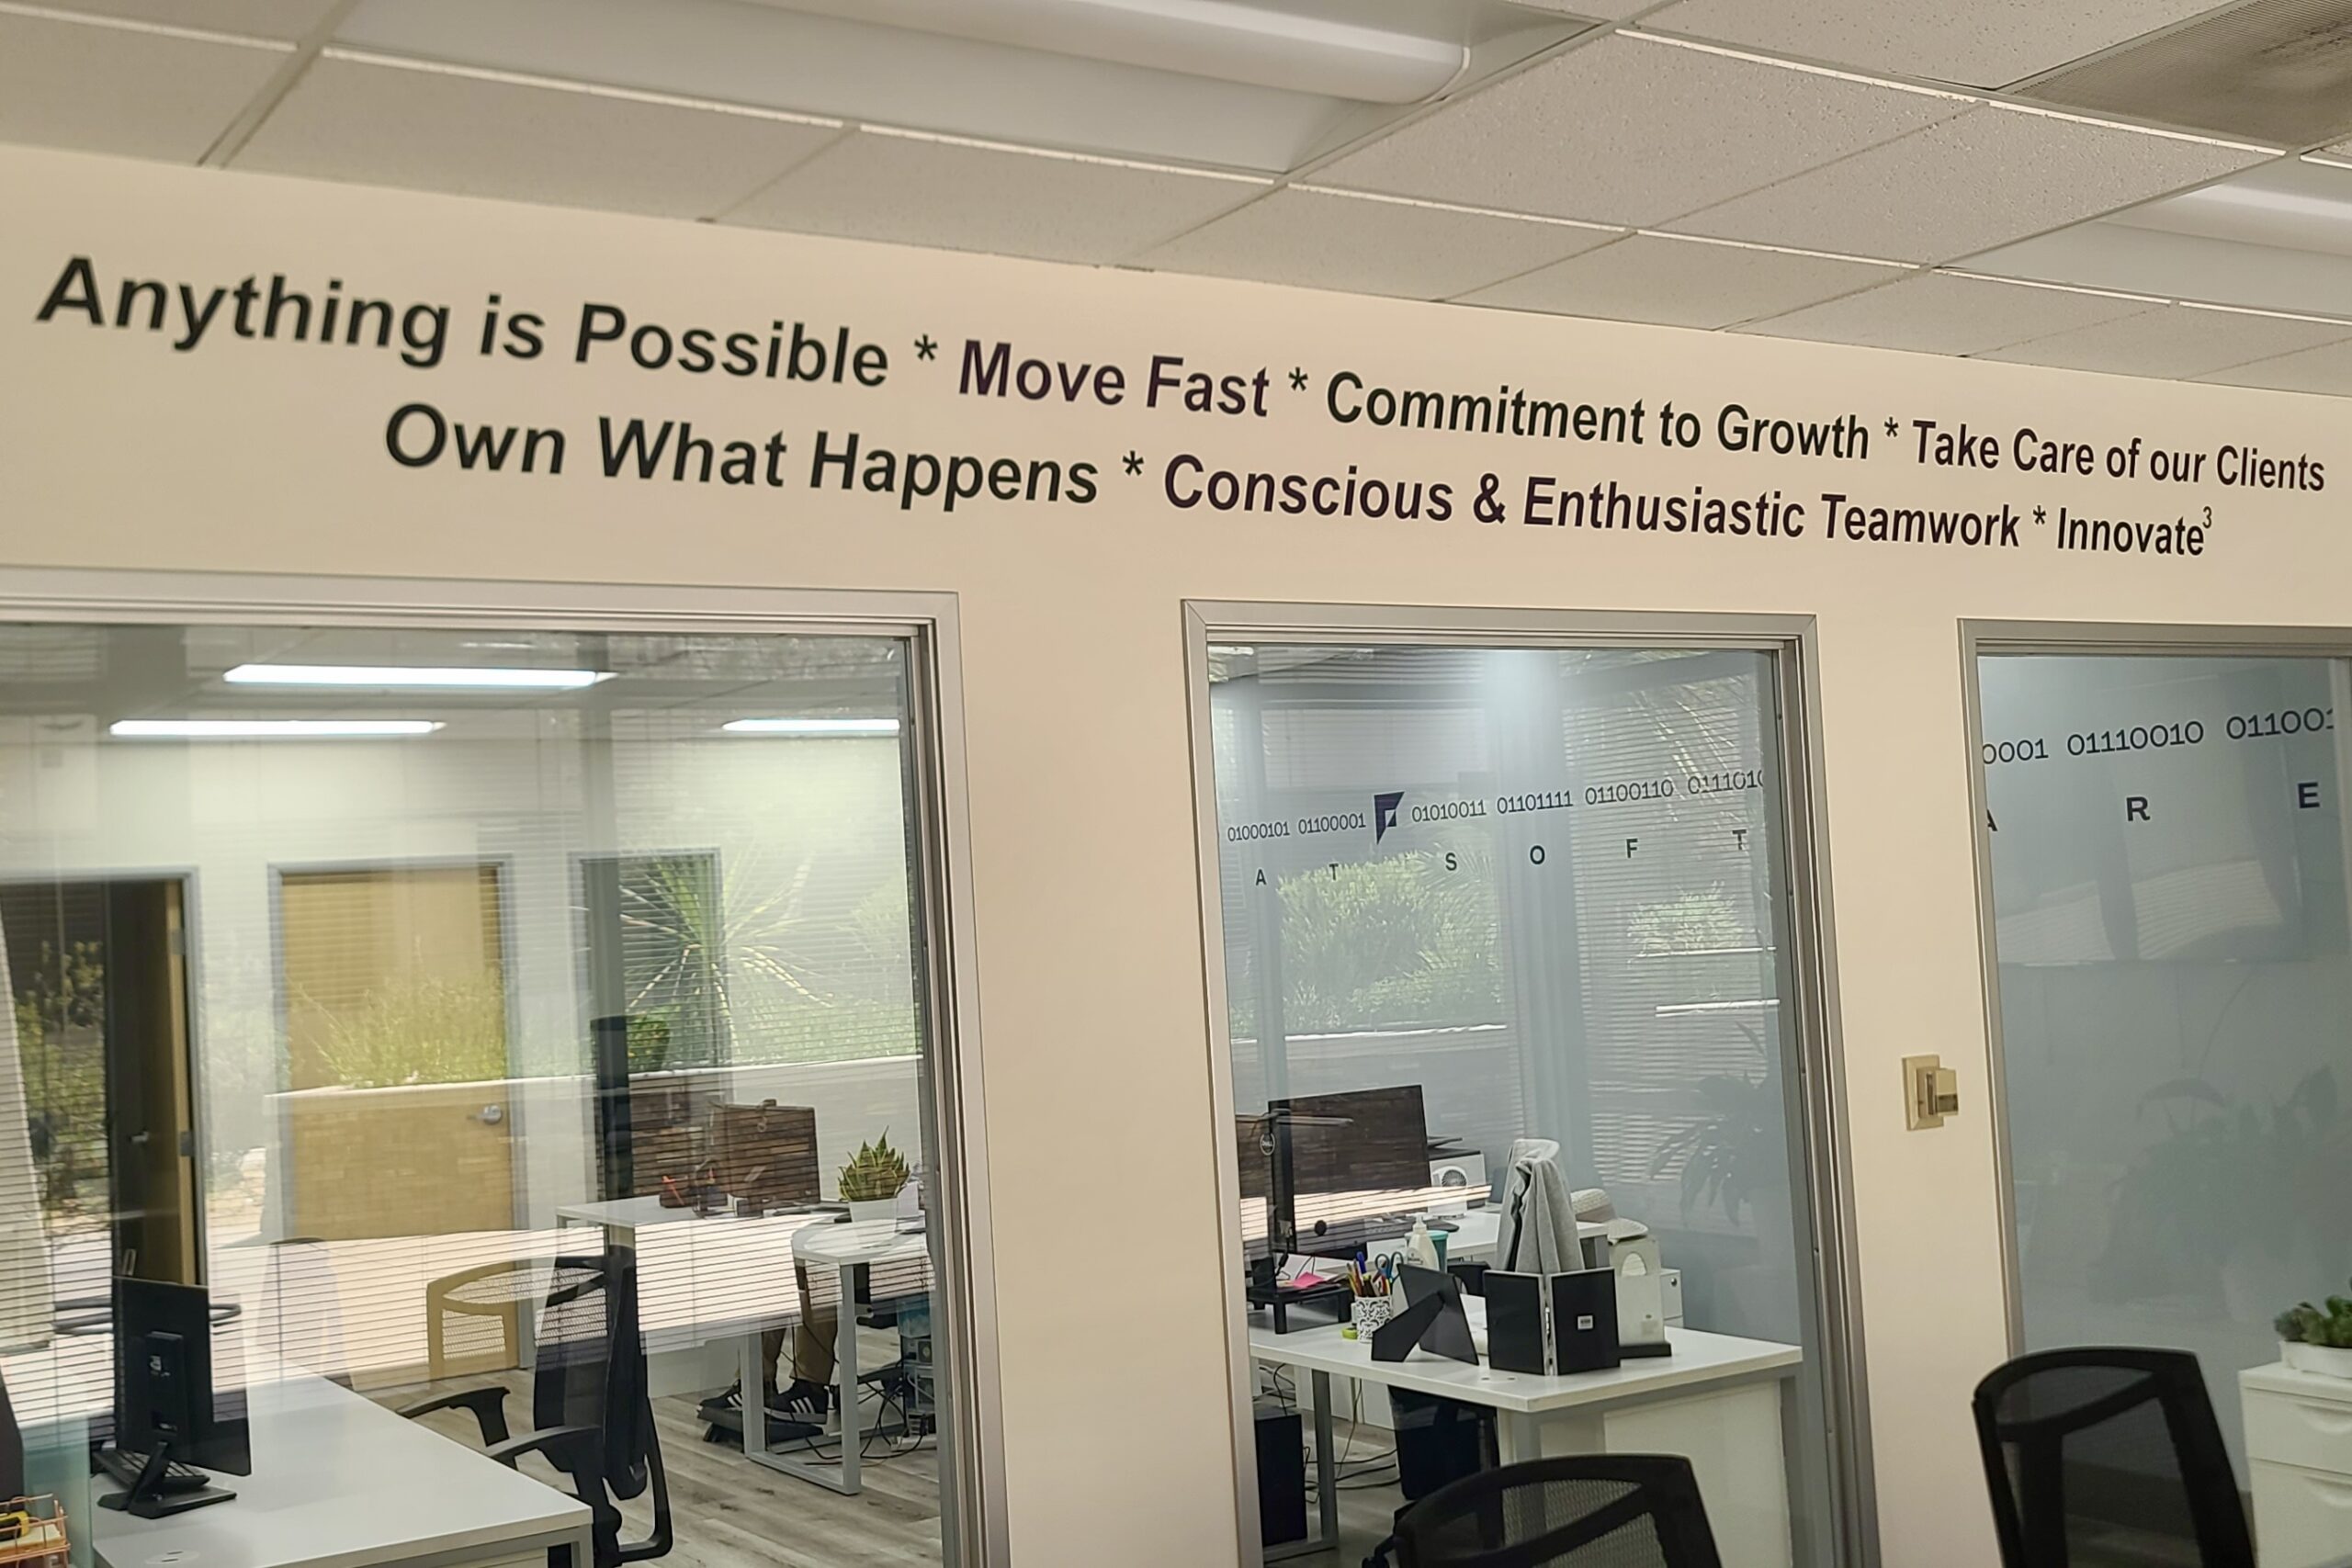 Motivational wall graphic installed in office setting, perfect for Calabasas businesses.